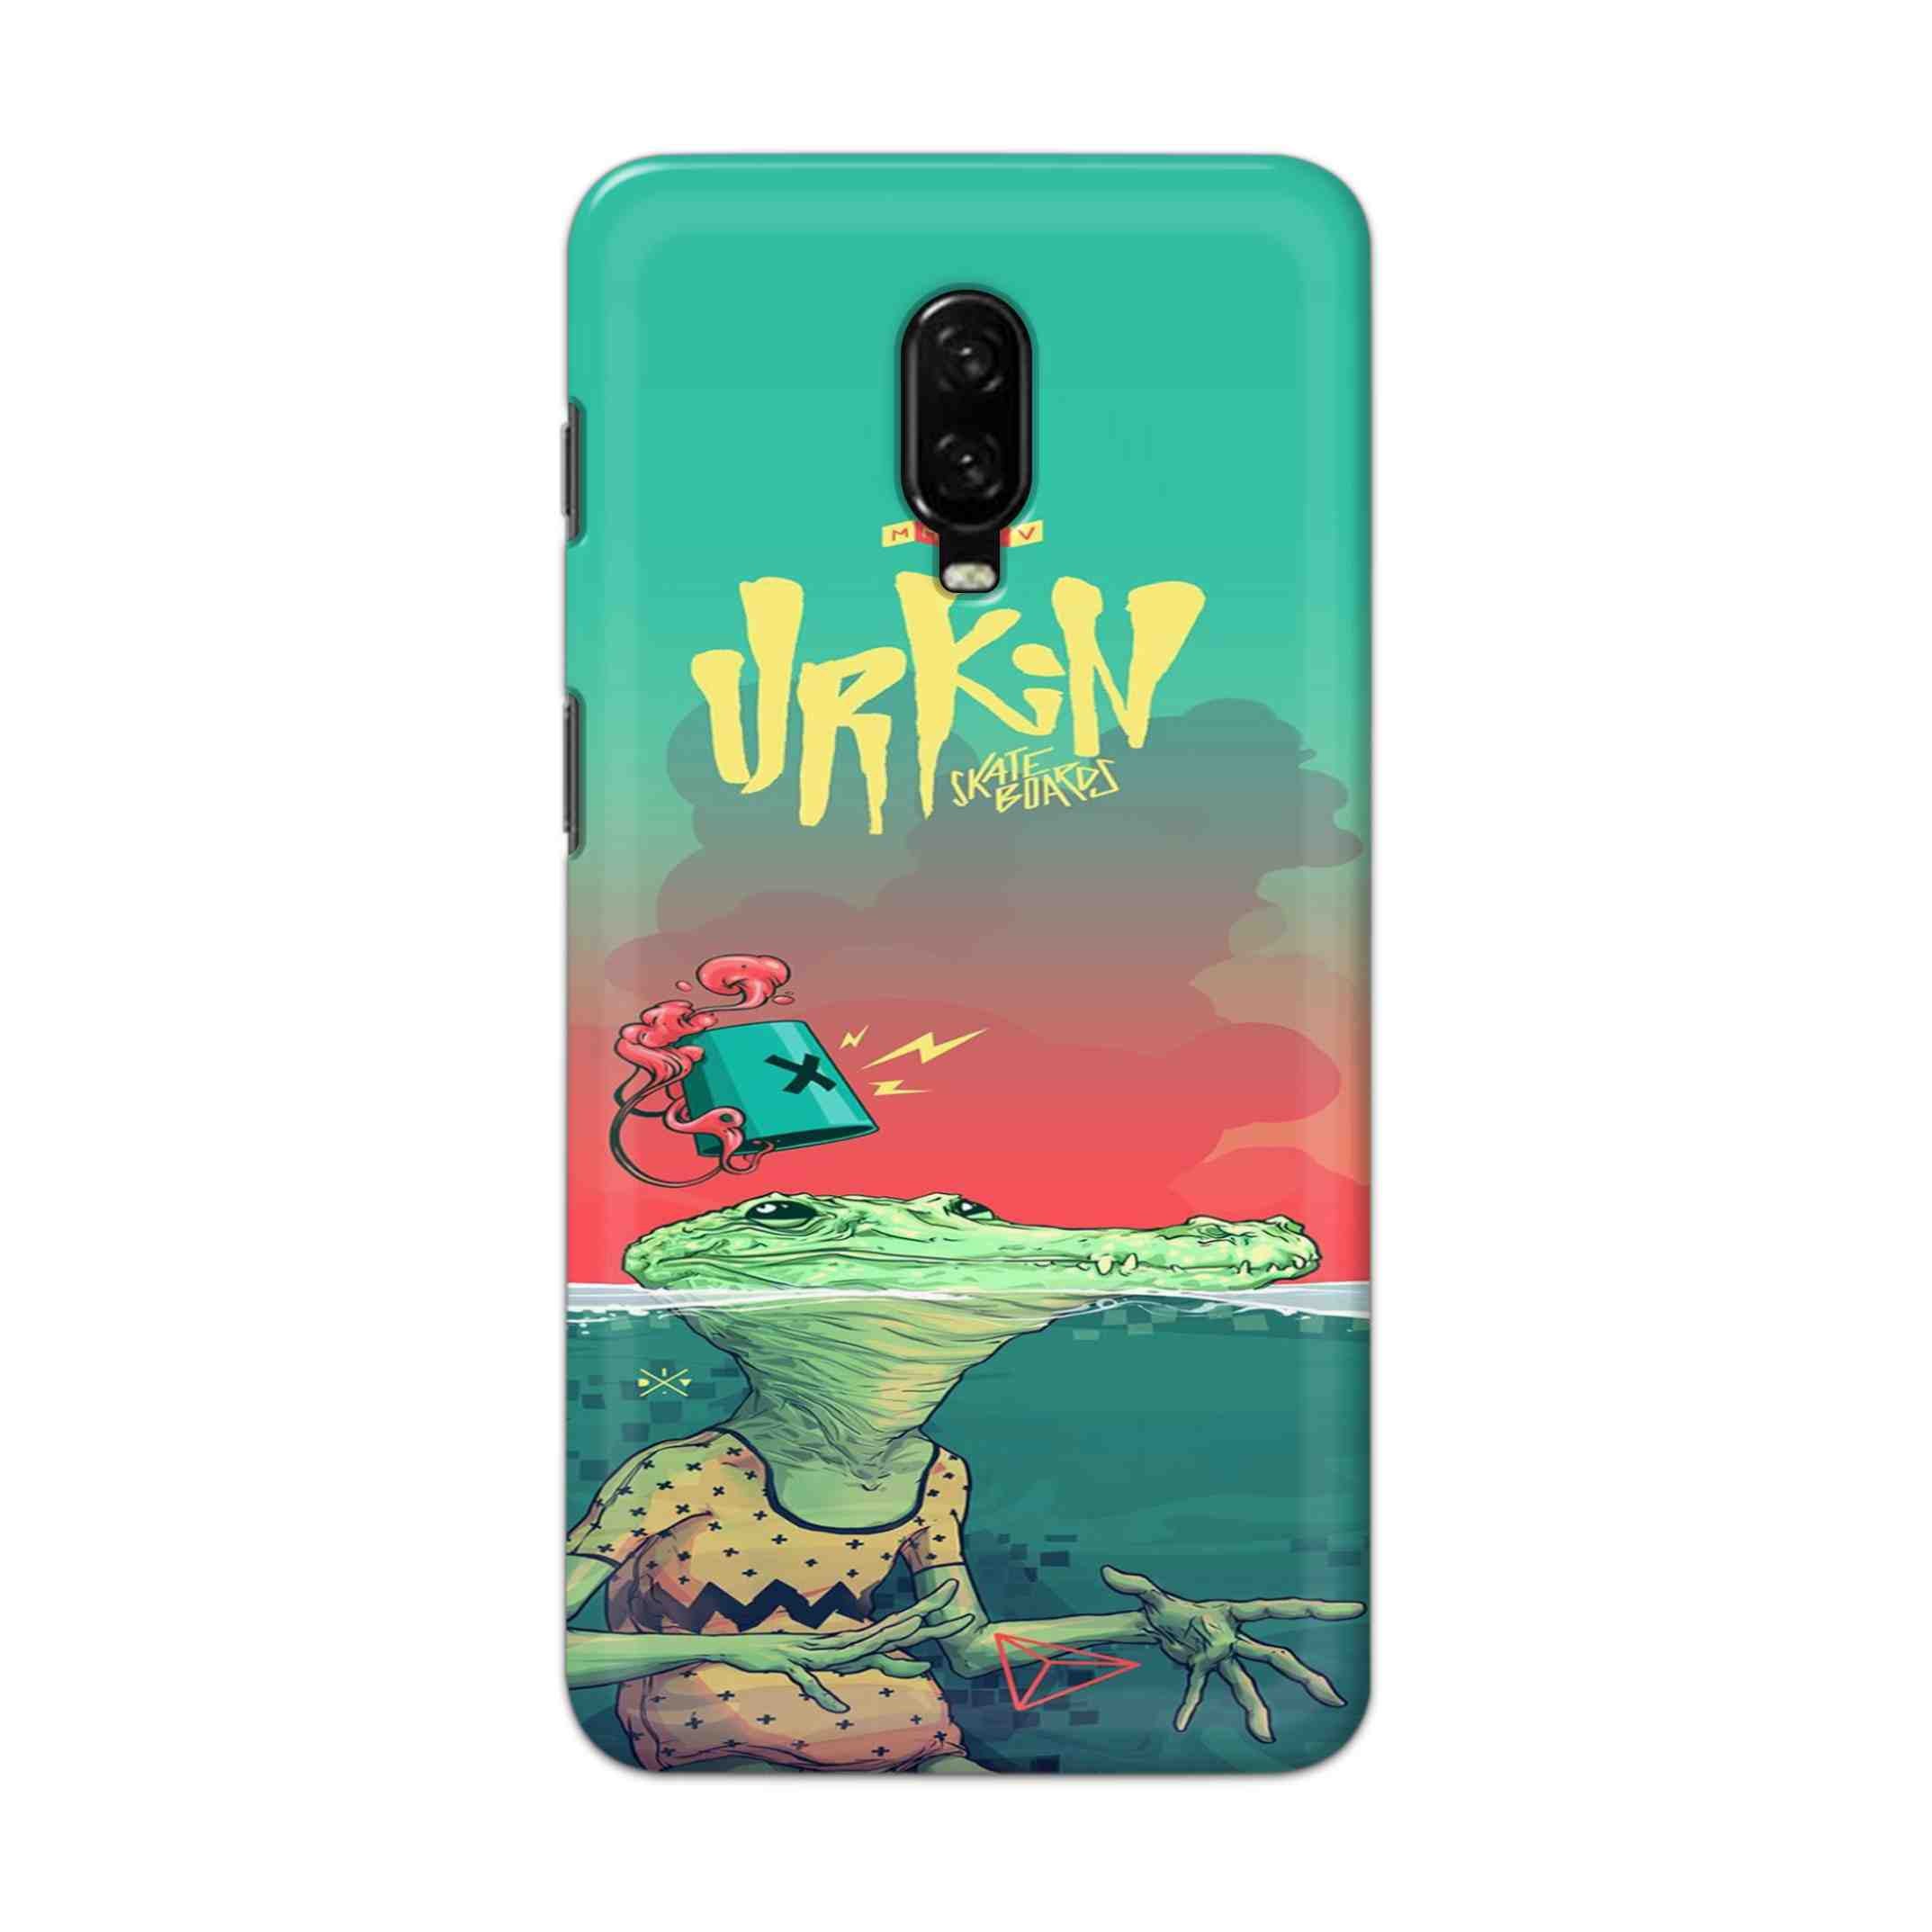 Buy Urkin Hard Back Mobile Phone Case Cover For OnePlus 6T Online